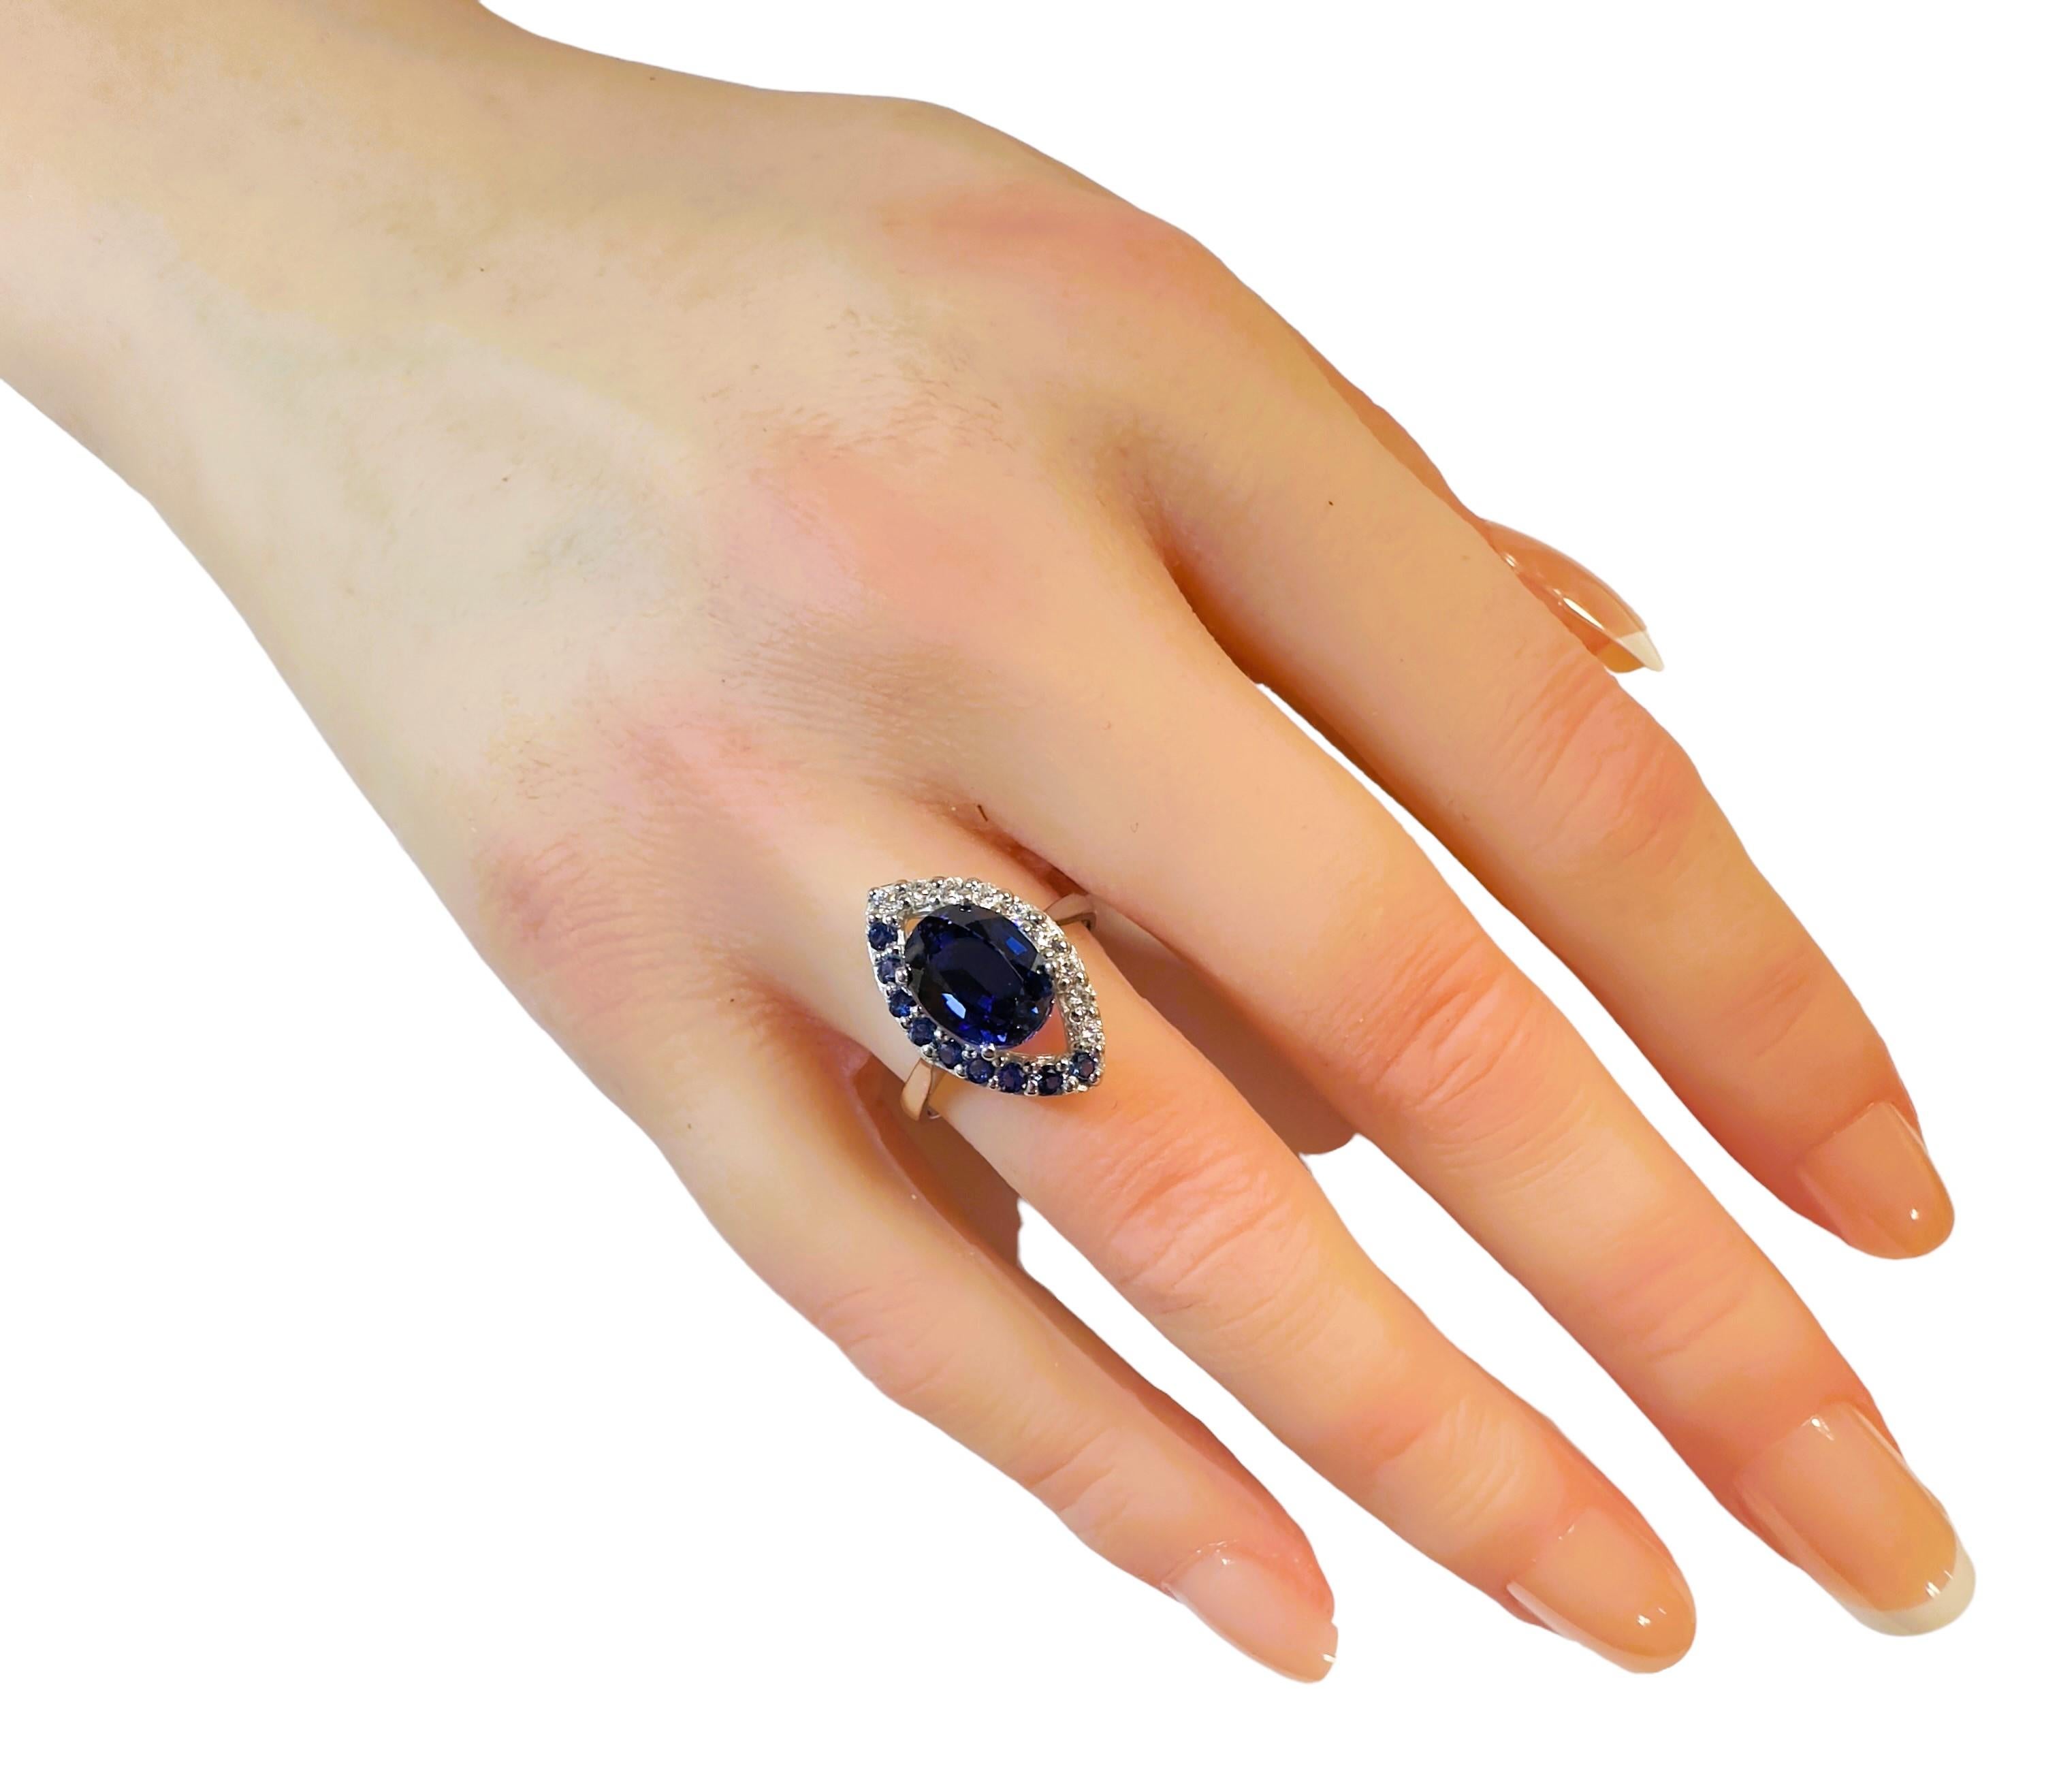 New Handmade African 3.60 Ct Deep Blue Sapphire Sterling Ring Size 6.75 For Sale 1